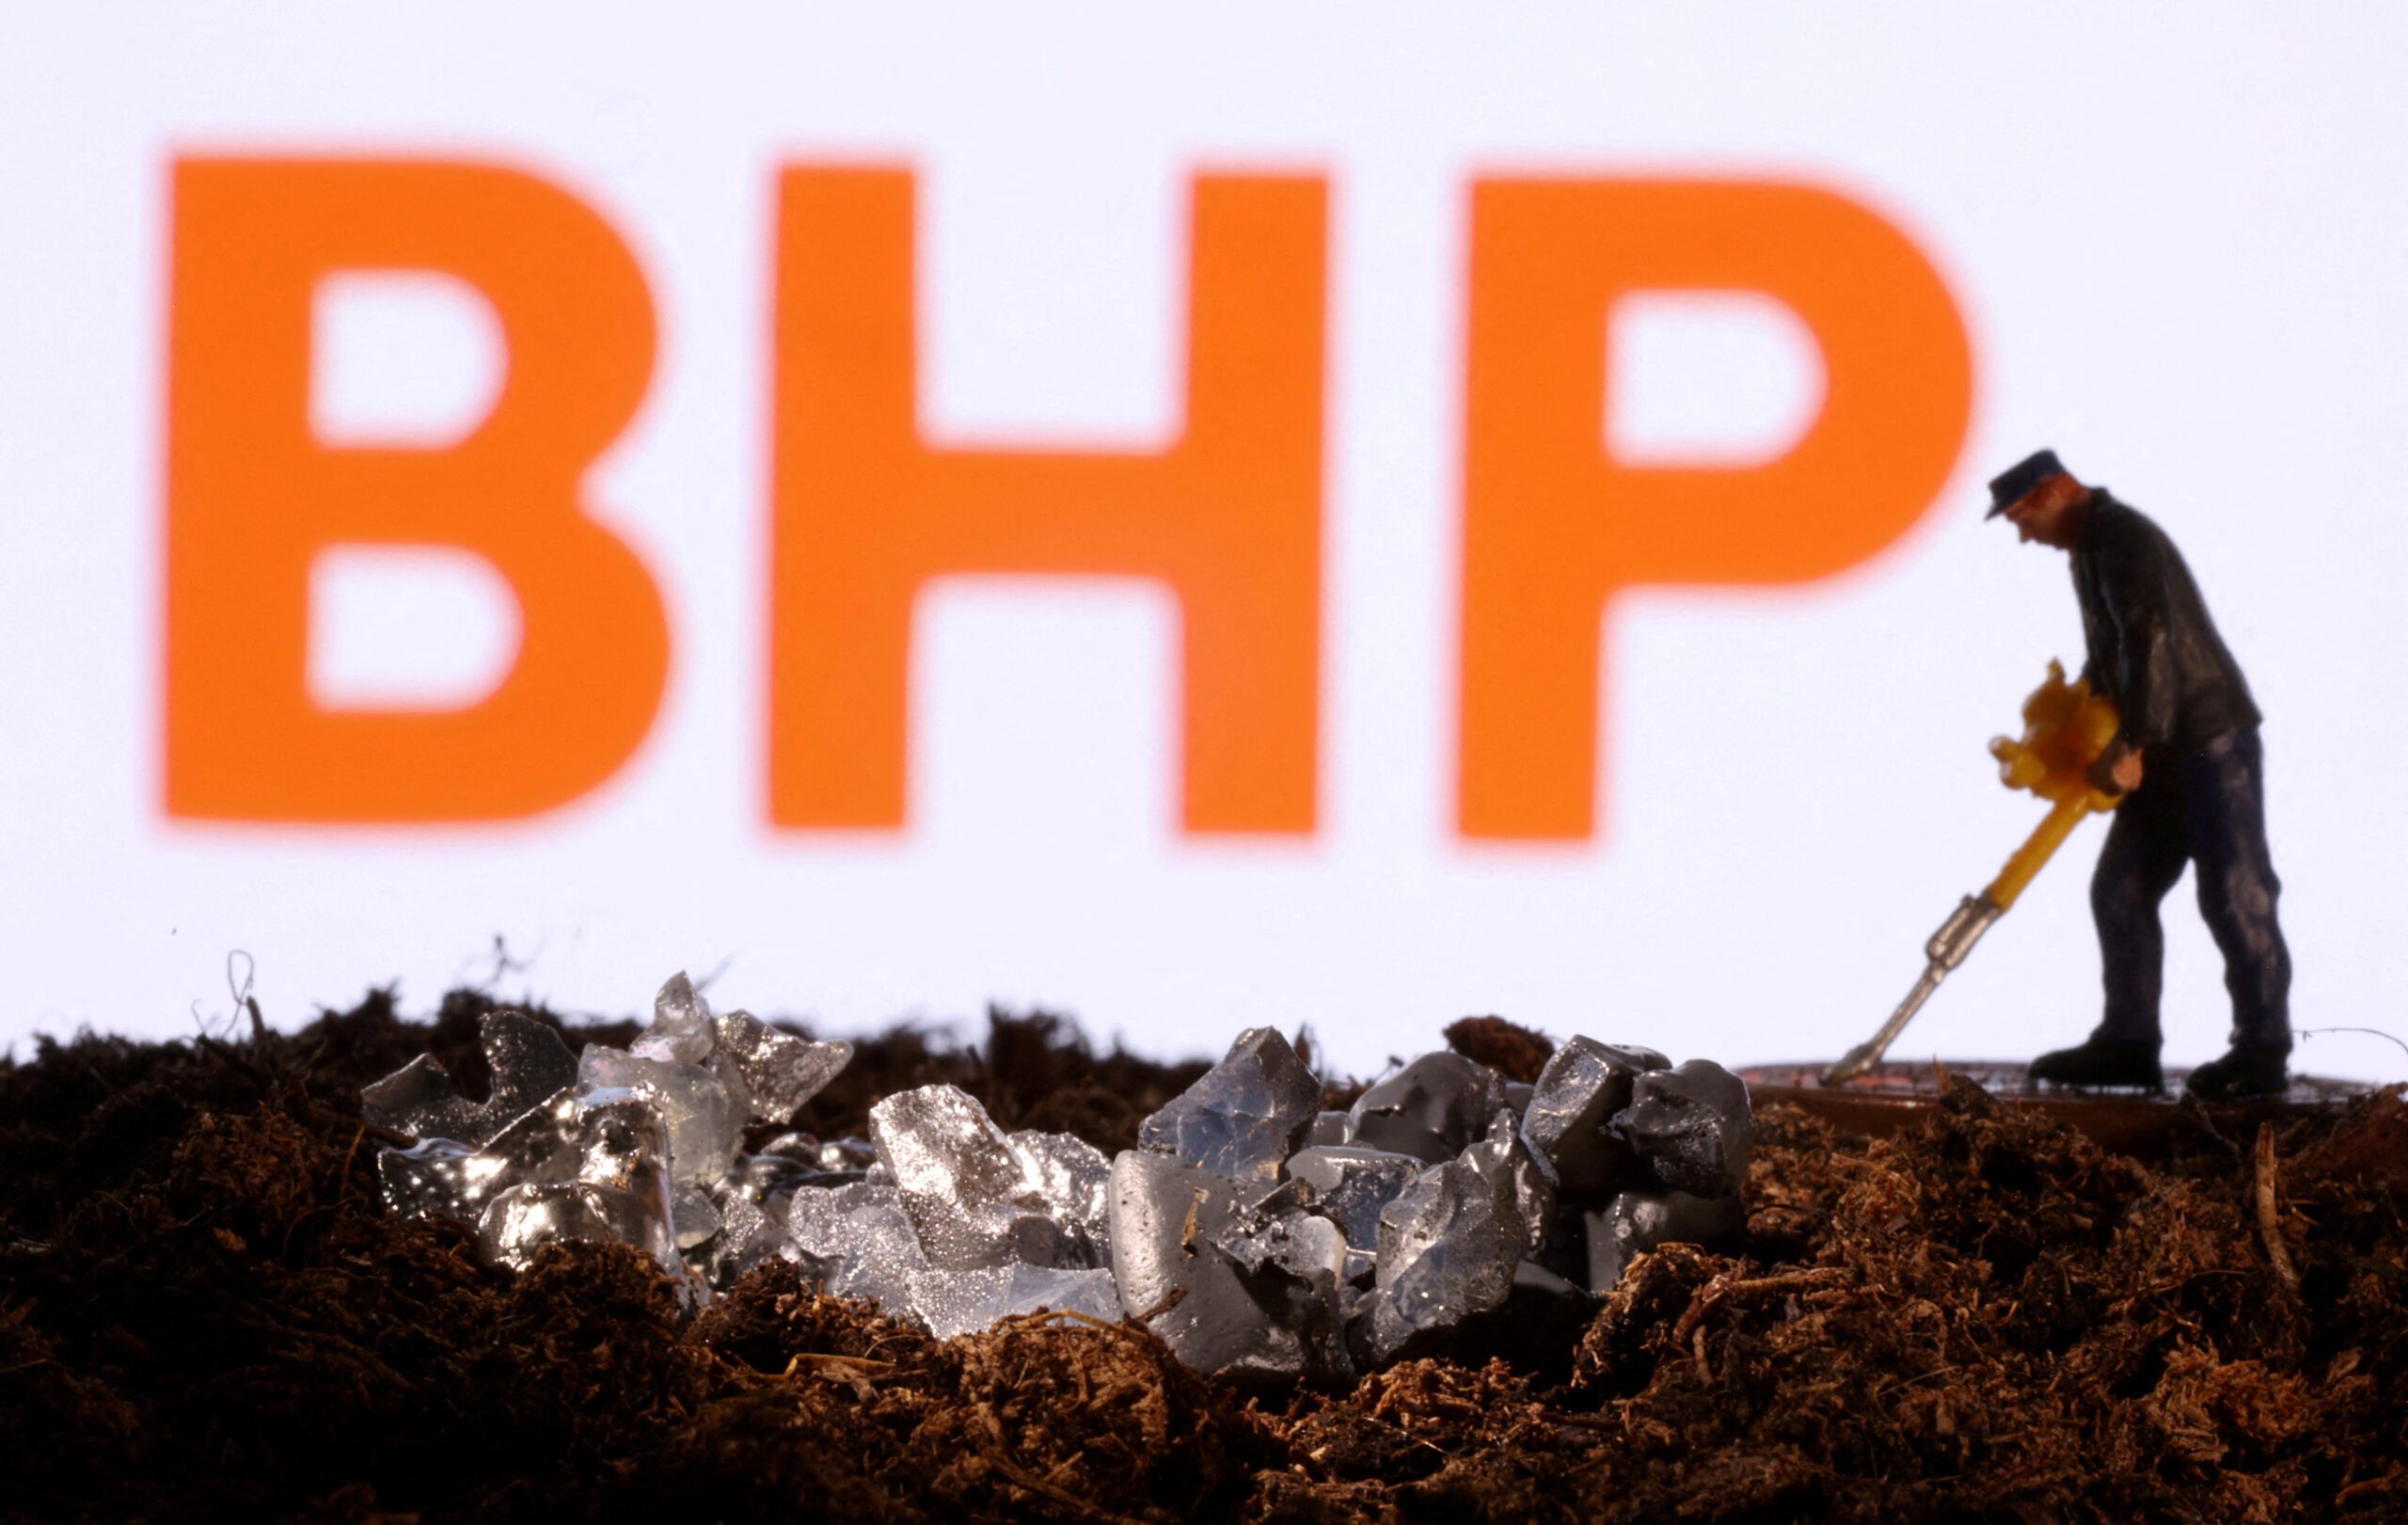 FILE PHOTO: A small toy figure and mineral imitation are seen in front of the BHP logo in this illustration taken November 19, 2021. REUTERS/Dado Ruvic/Illustration/File Photo/File Photo